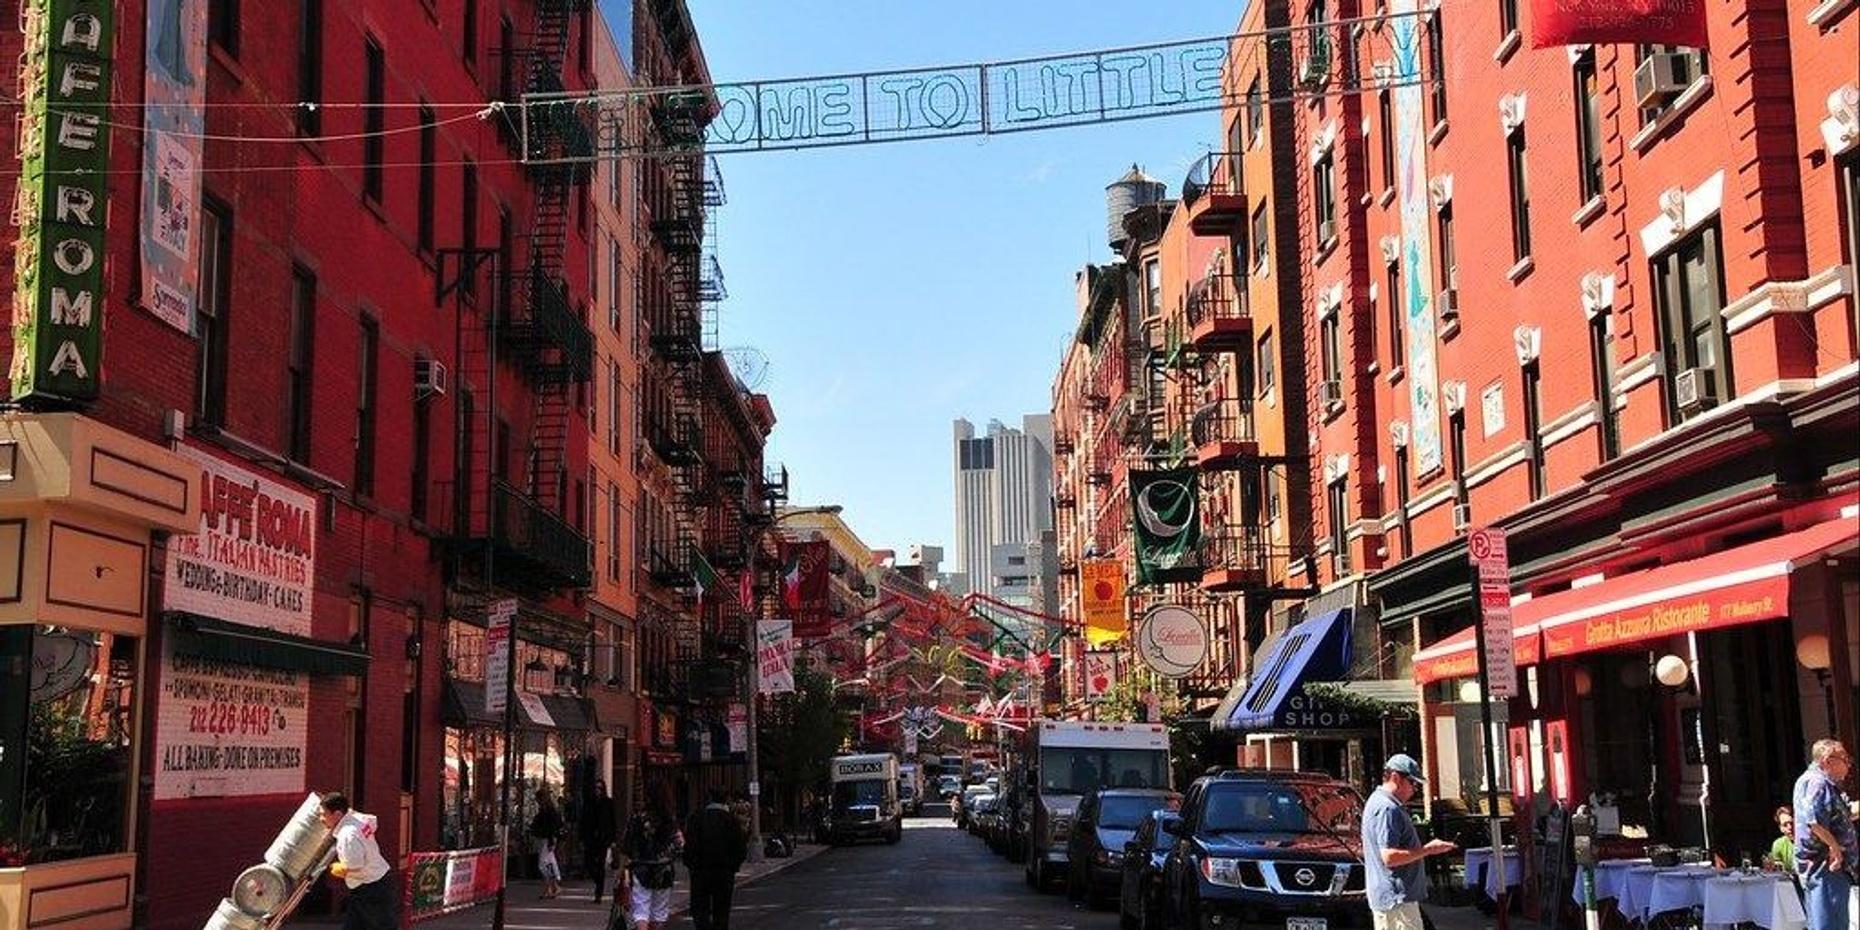 2-Hour Little Italy Tour in NYC